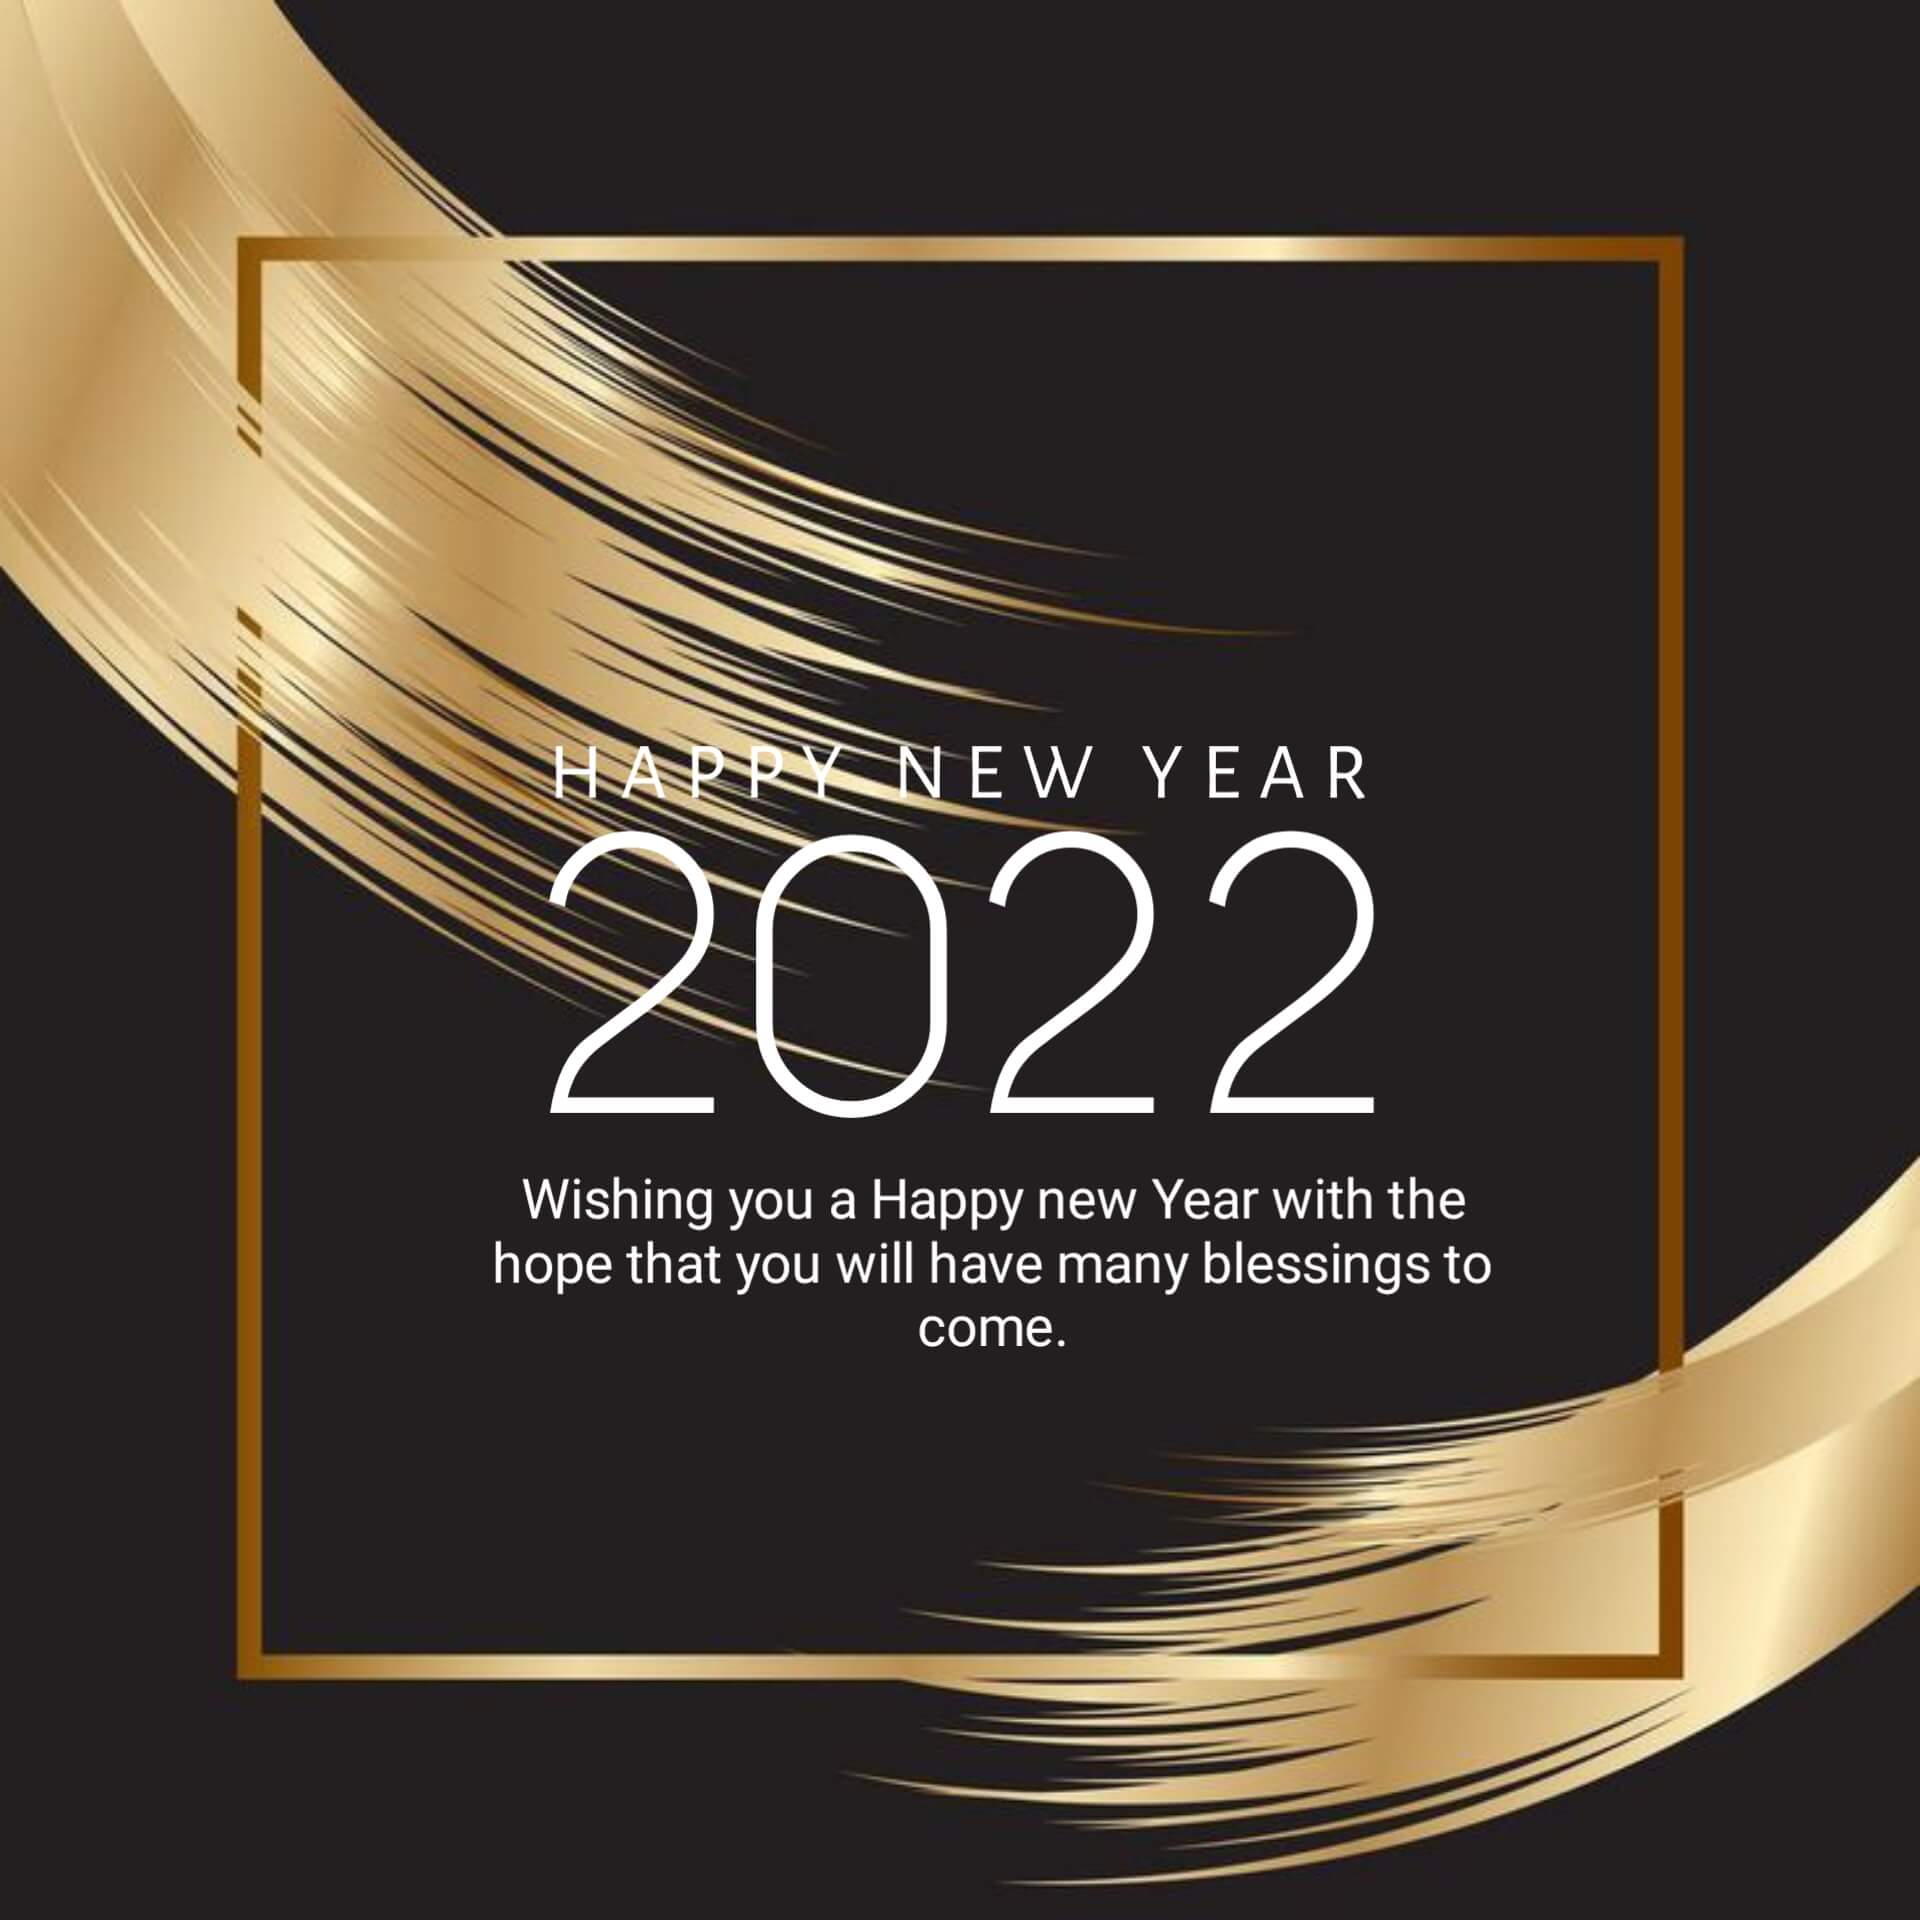 Happy New Year 2022 Wishes with Images